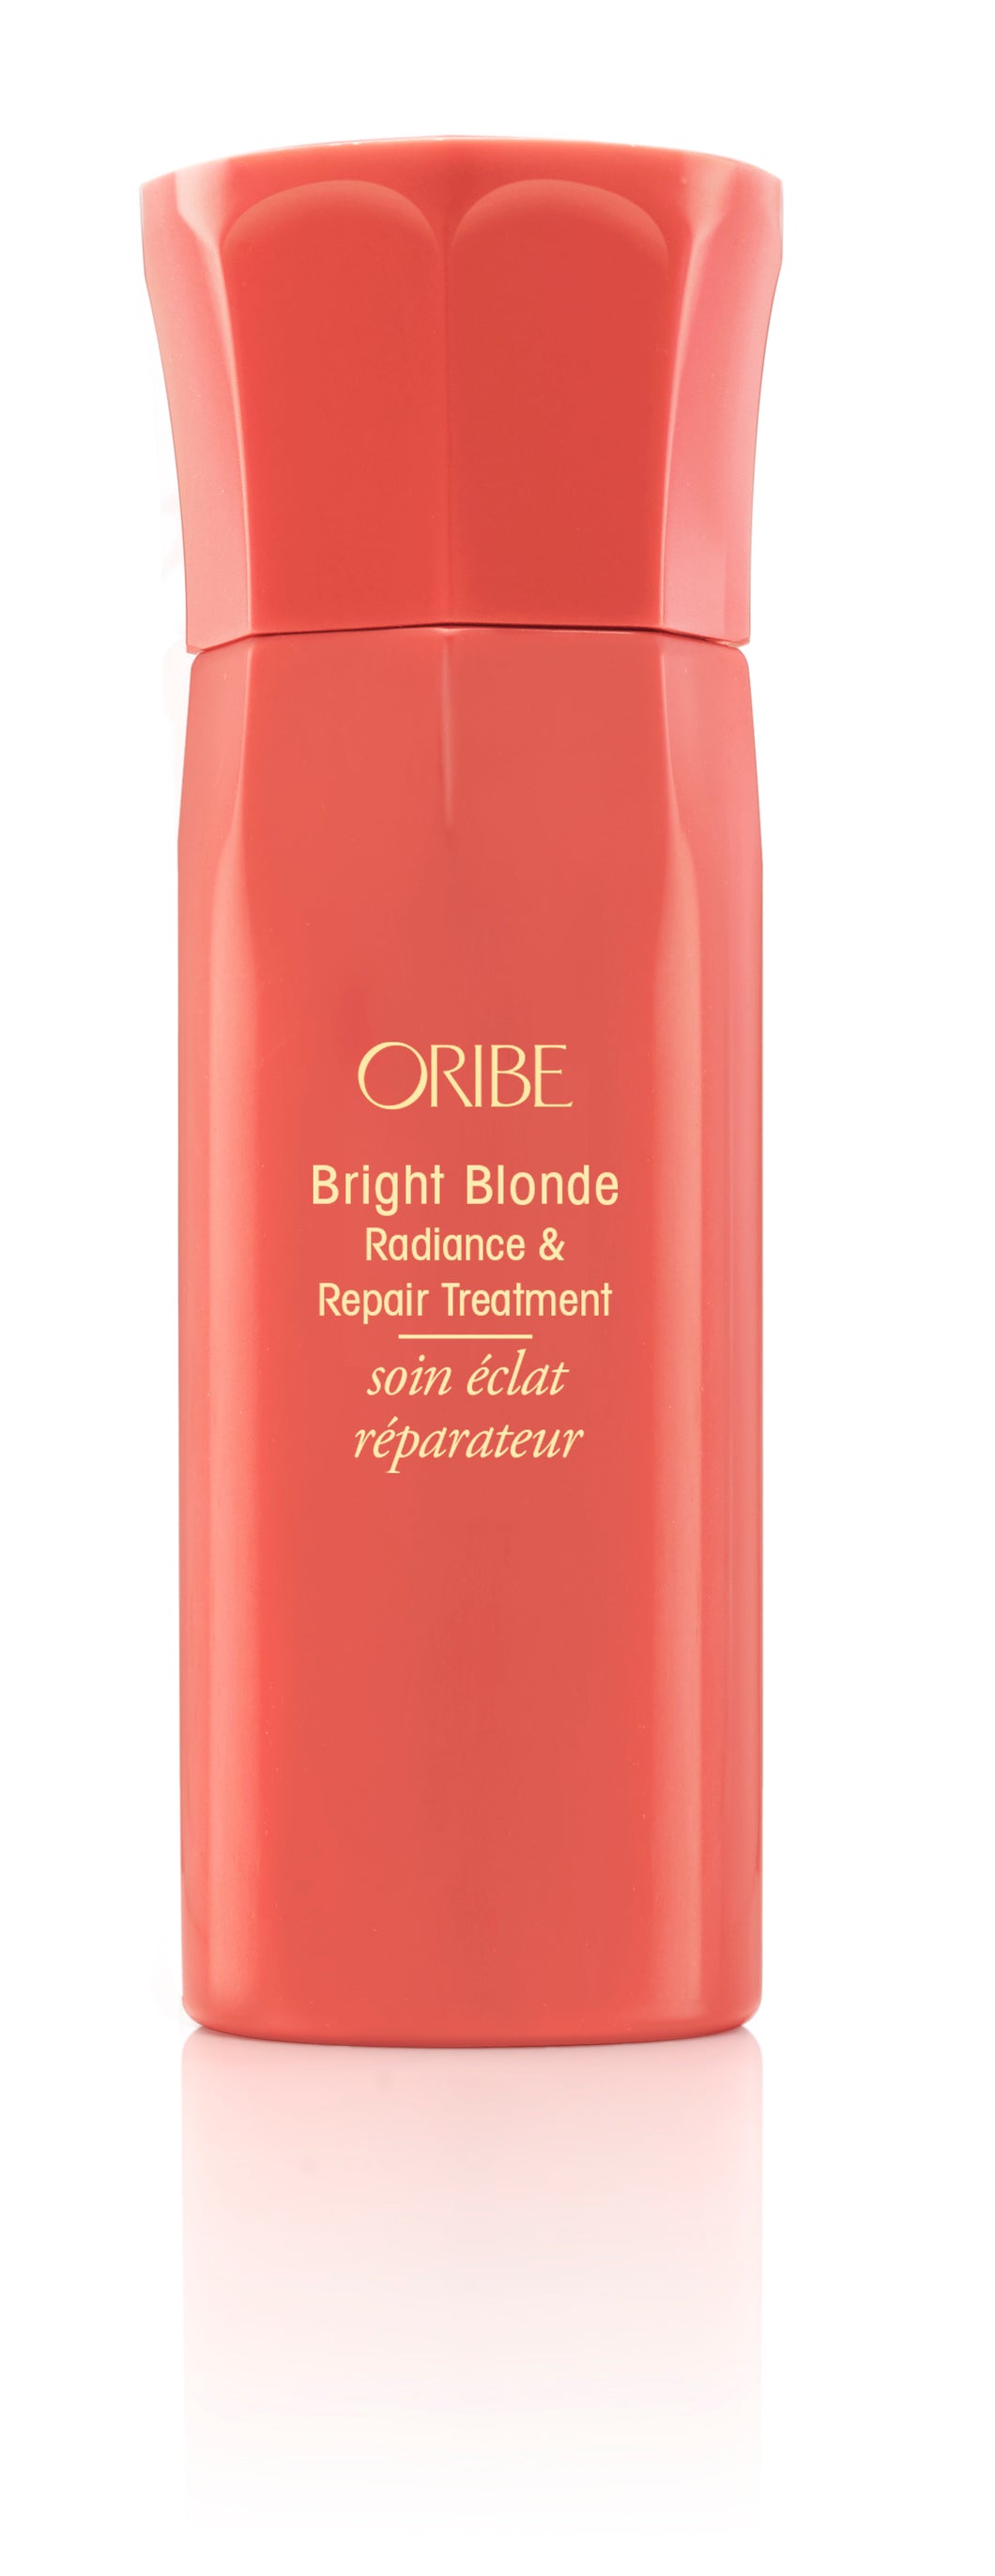 Bright Blonde Radiance and Repair Treatment